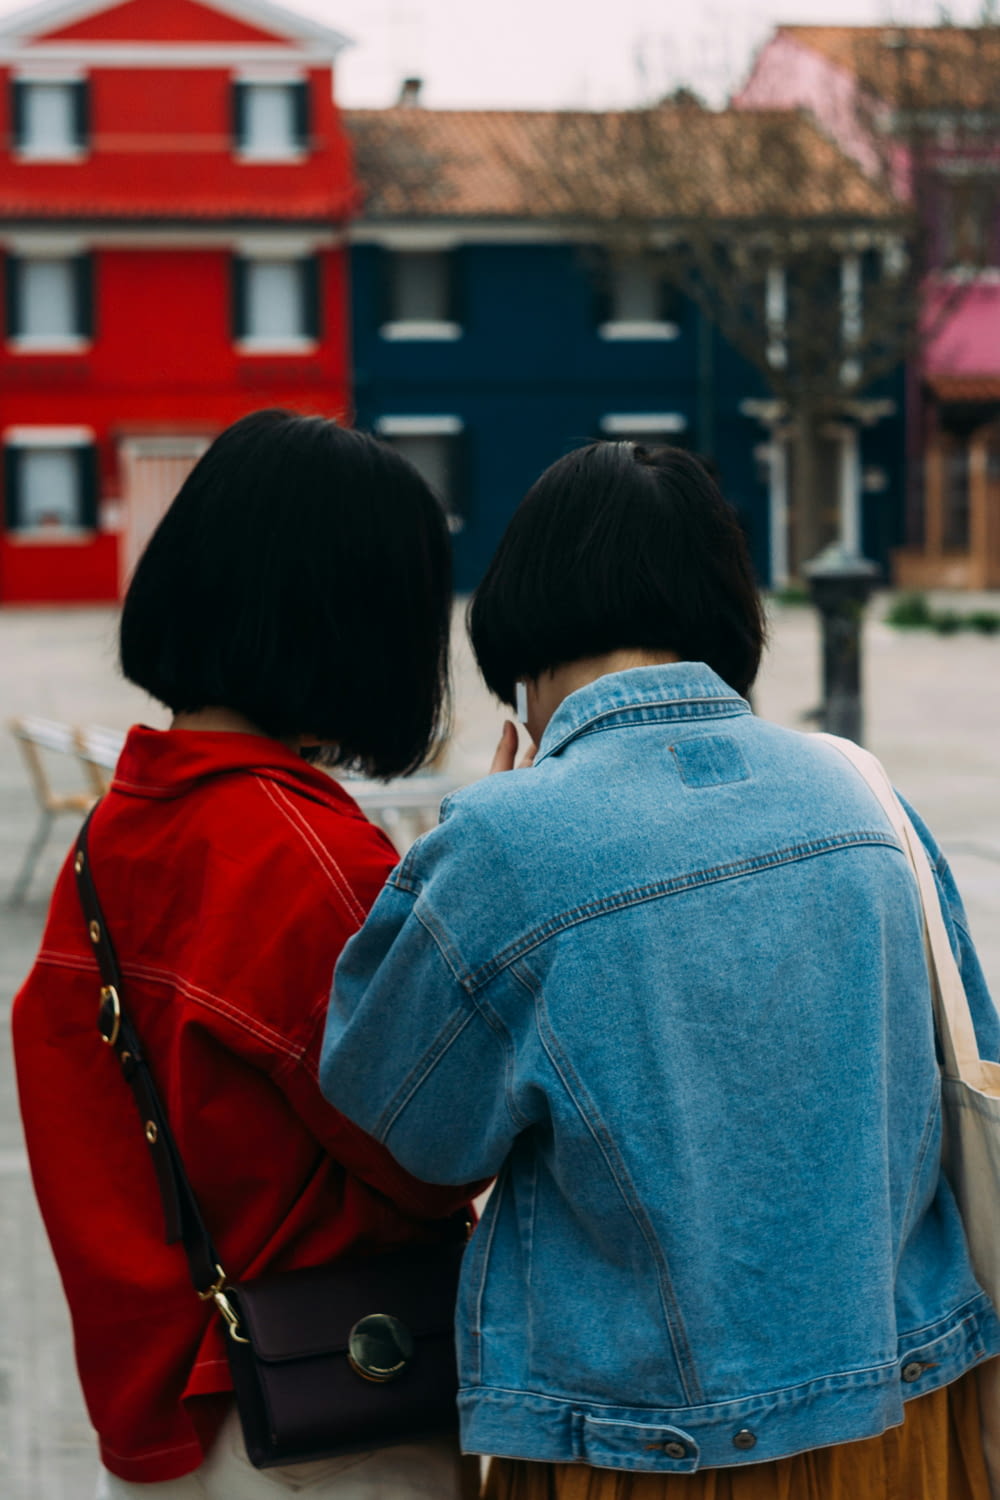 two women walking down a street with a red building in the background